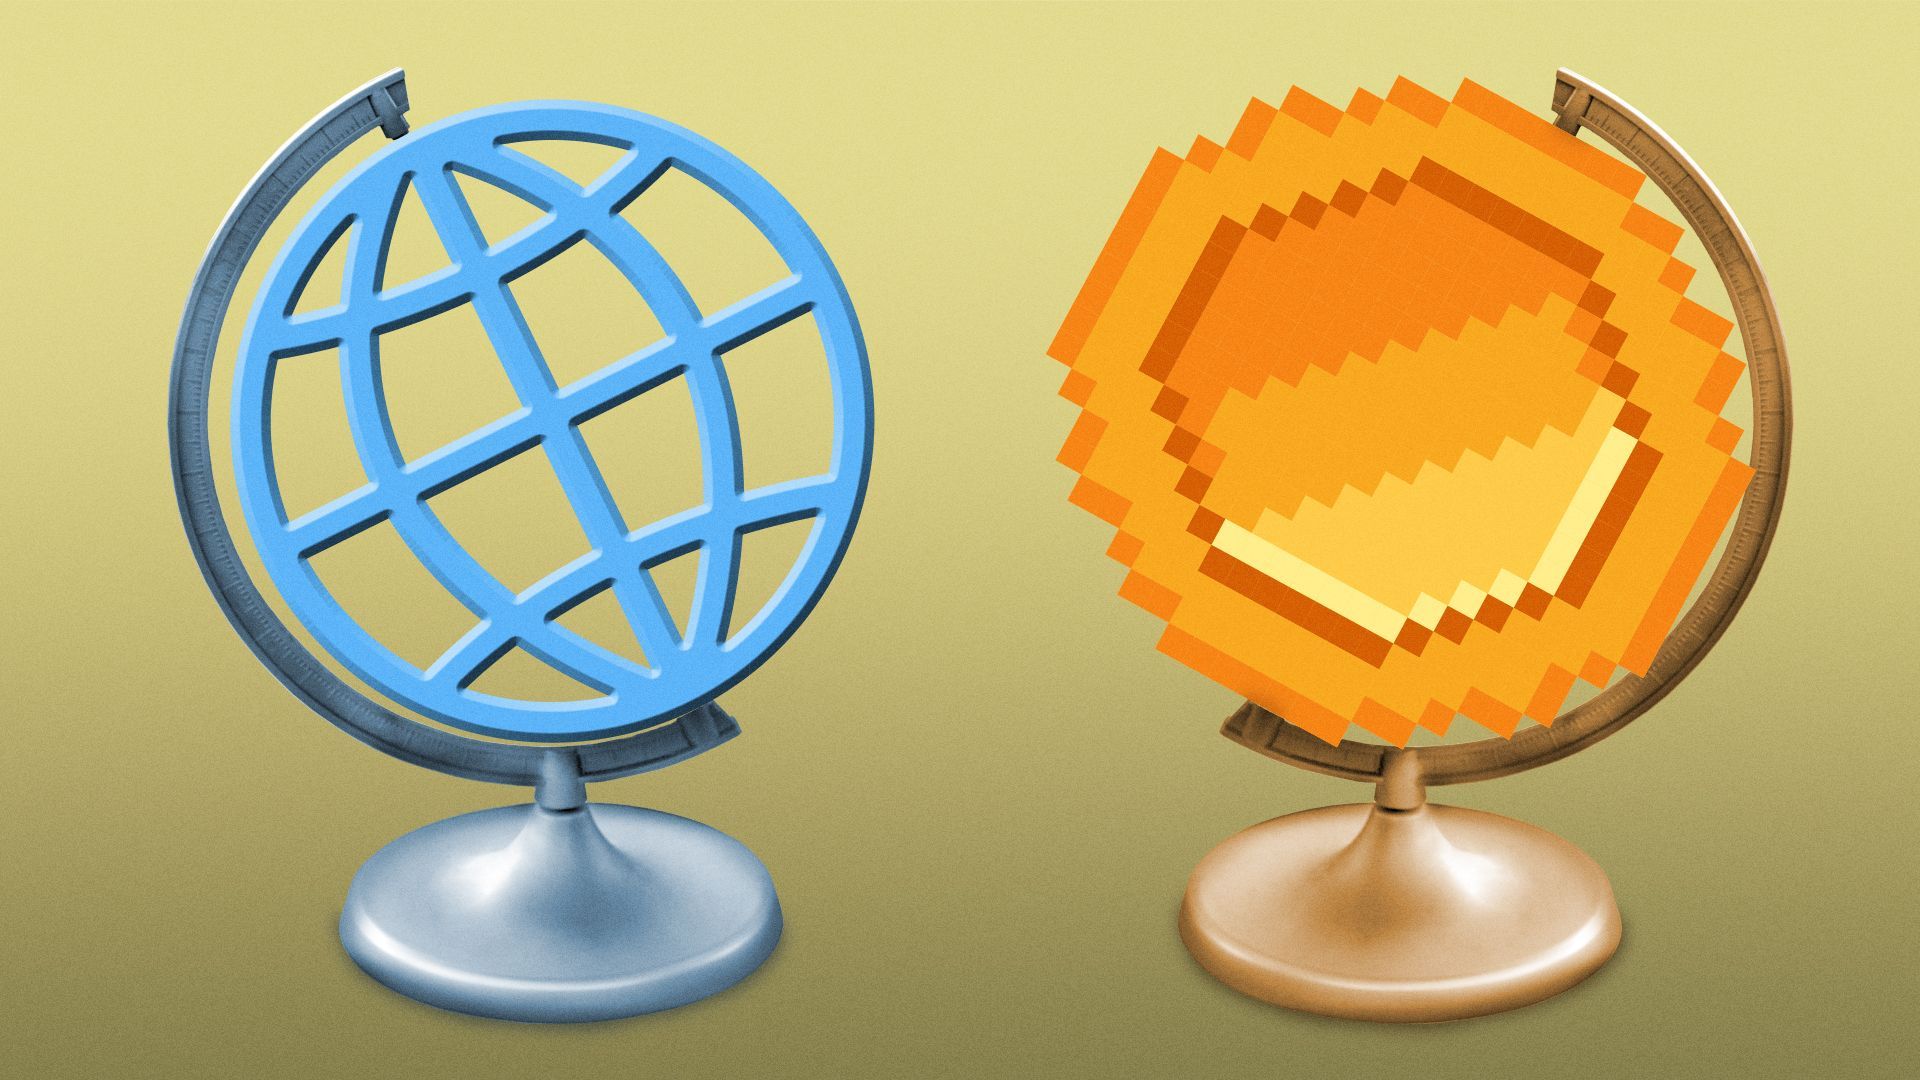 Illustration of two globe stands, one with the World Wide Web icon and one with a pixelated coin.